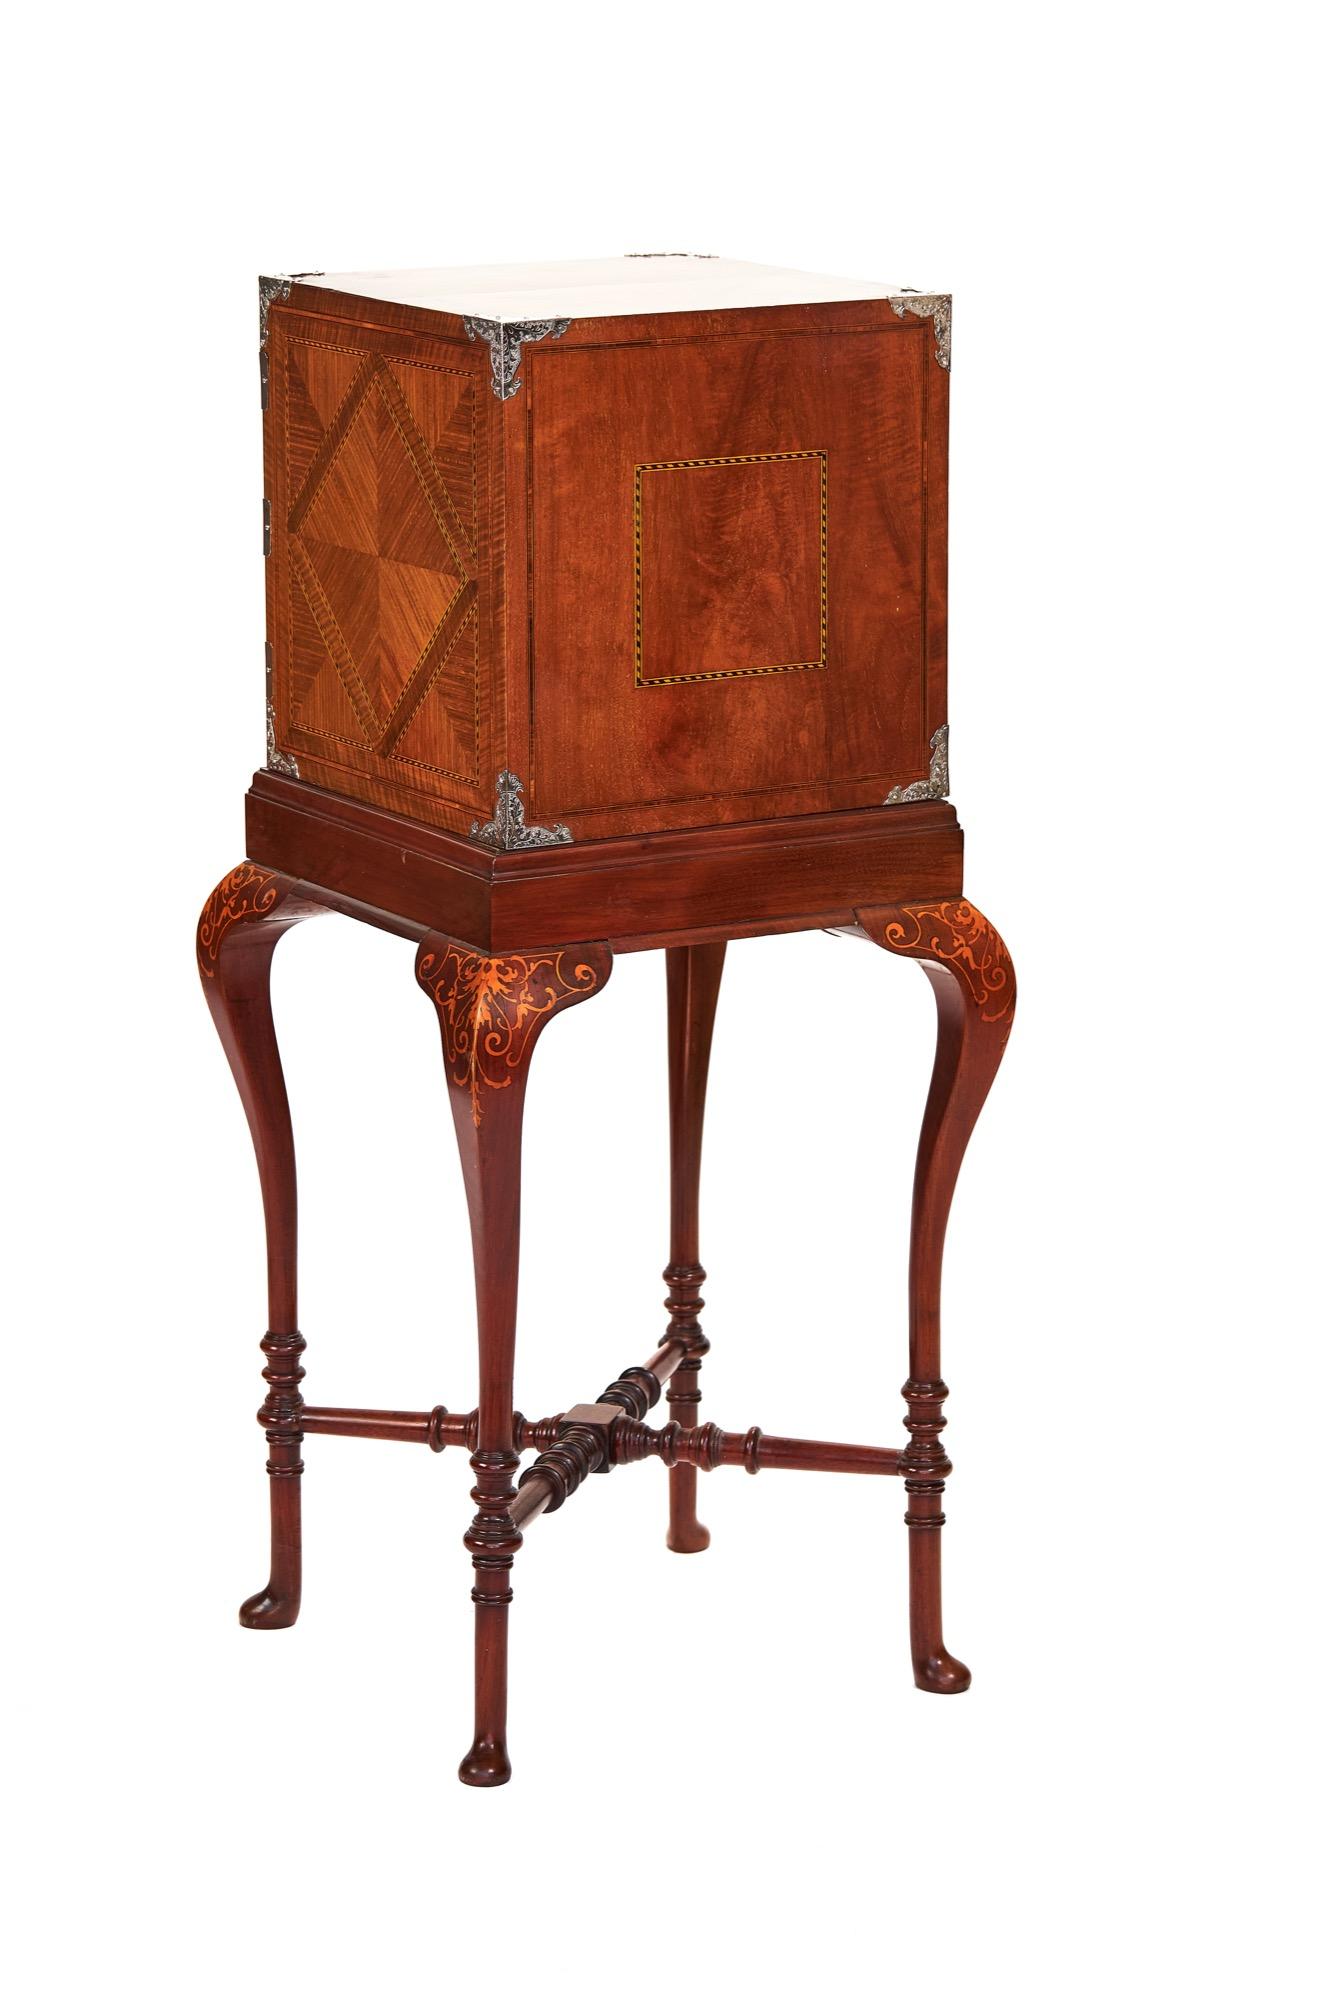 Polished Fine Gillows, Walnut & Kingwood inlaid fitted drawer cabinet on stand For Sale